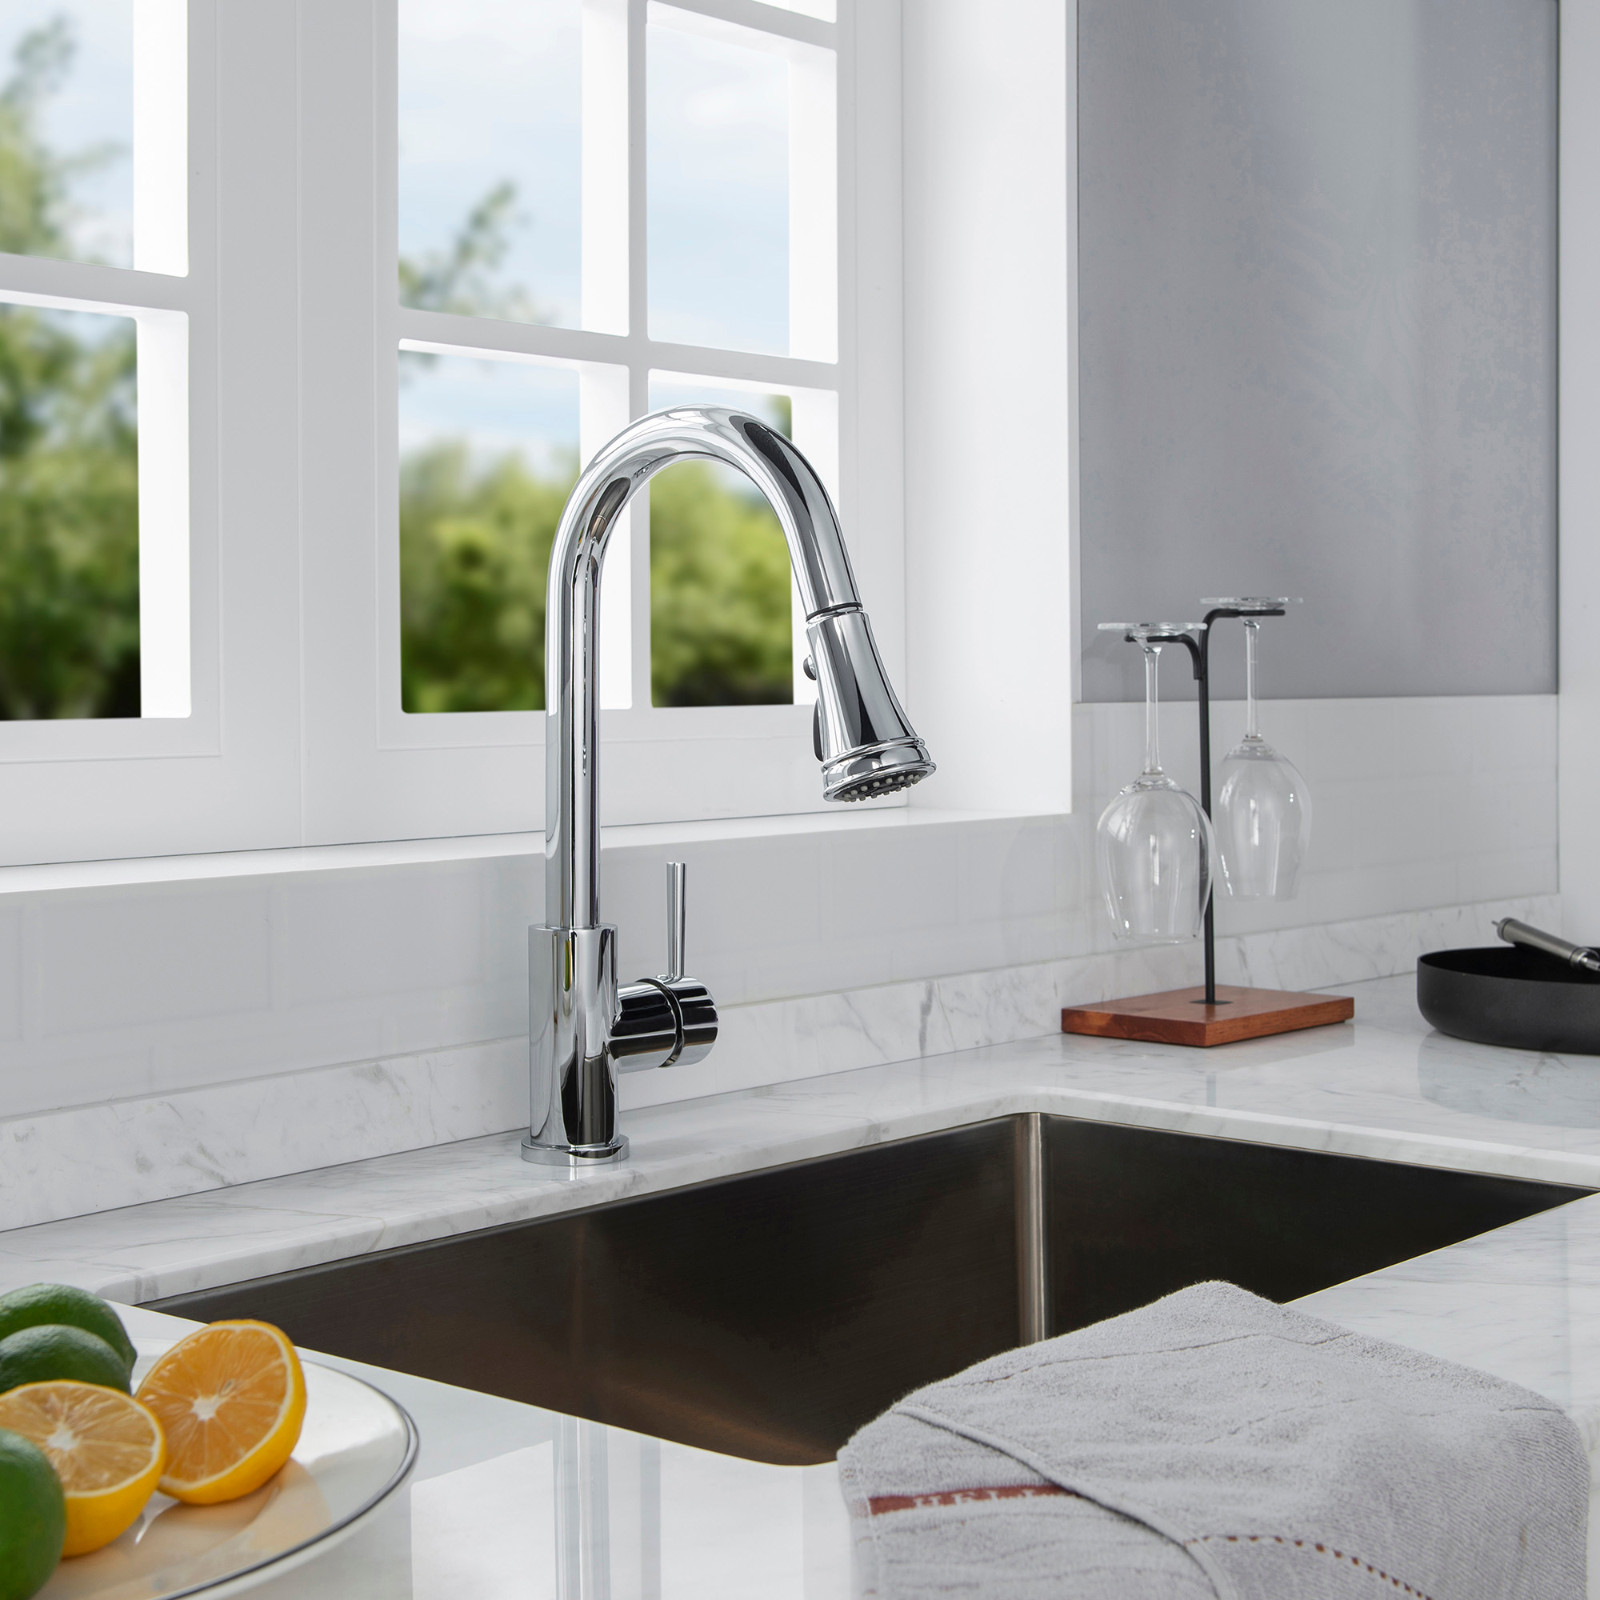  WOODBRIDGE WK090801CH Stainless Steel Single Handle Pull Down Kitchen Faucet in Chrome Finish._9398